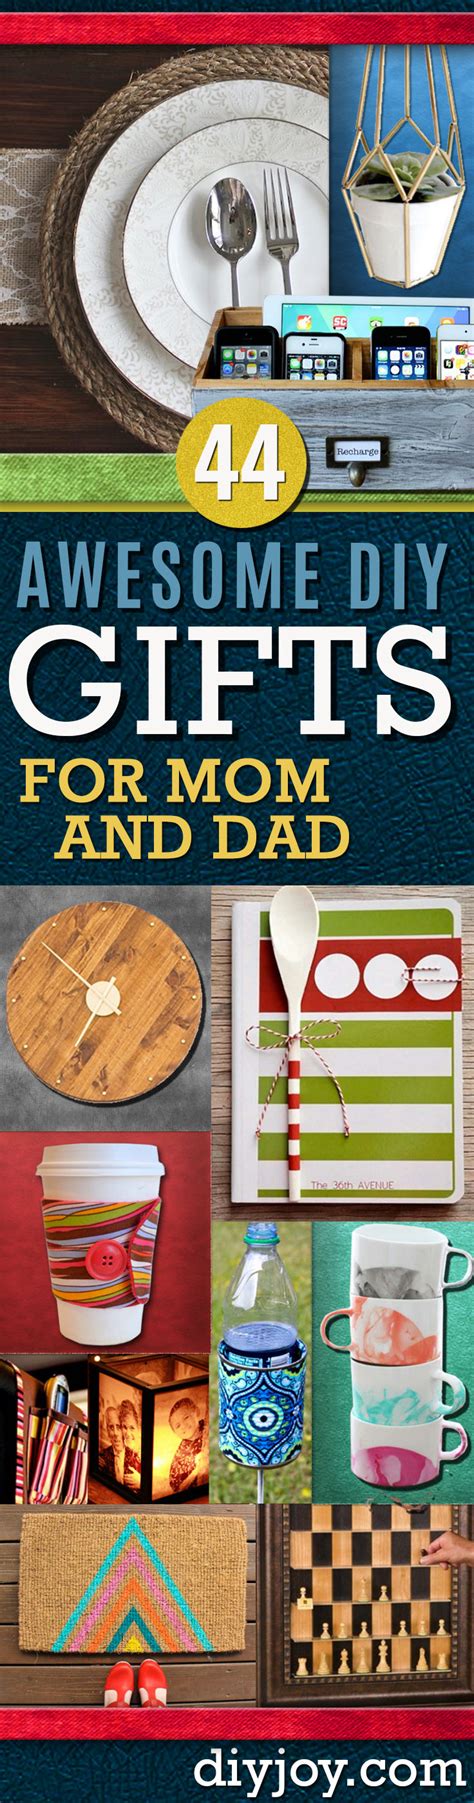 We all know shopping for men is the hardest thing in the world, right? Awesome DIY Gift Ideas Mom and Dad Will Love